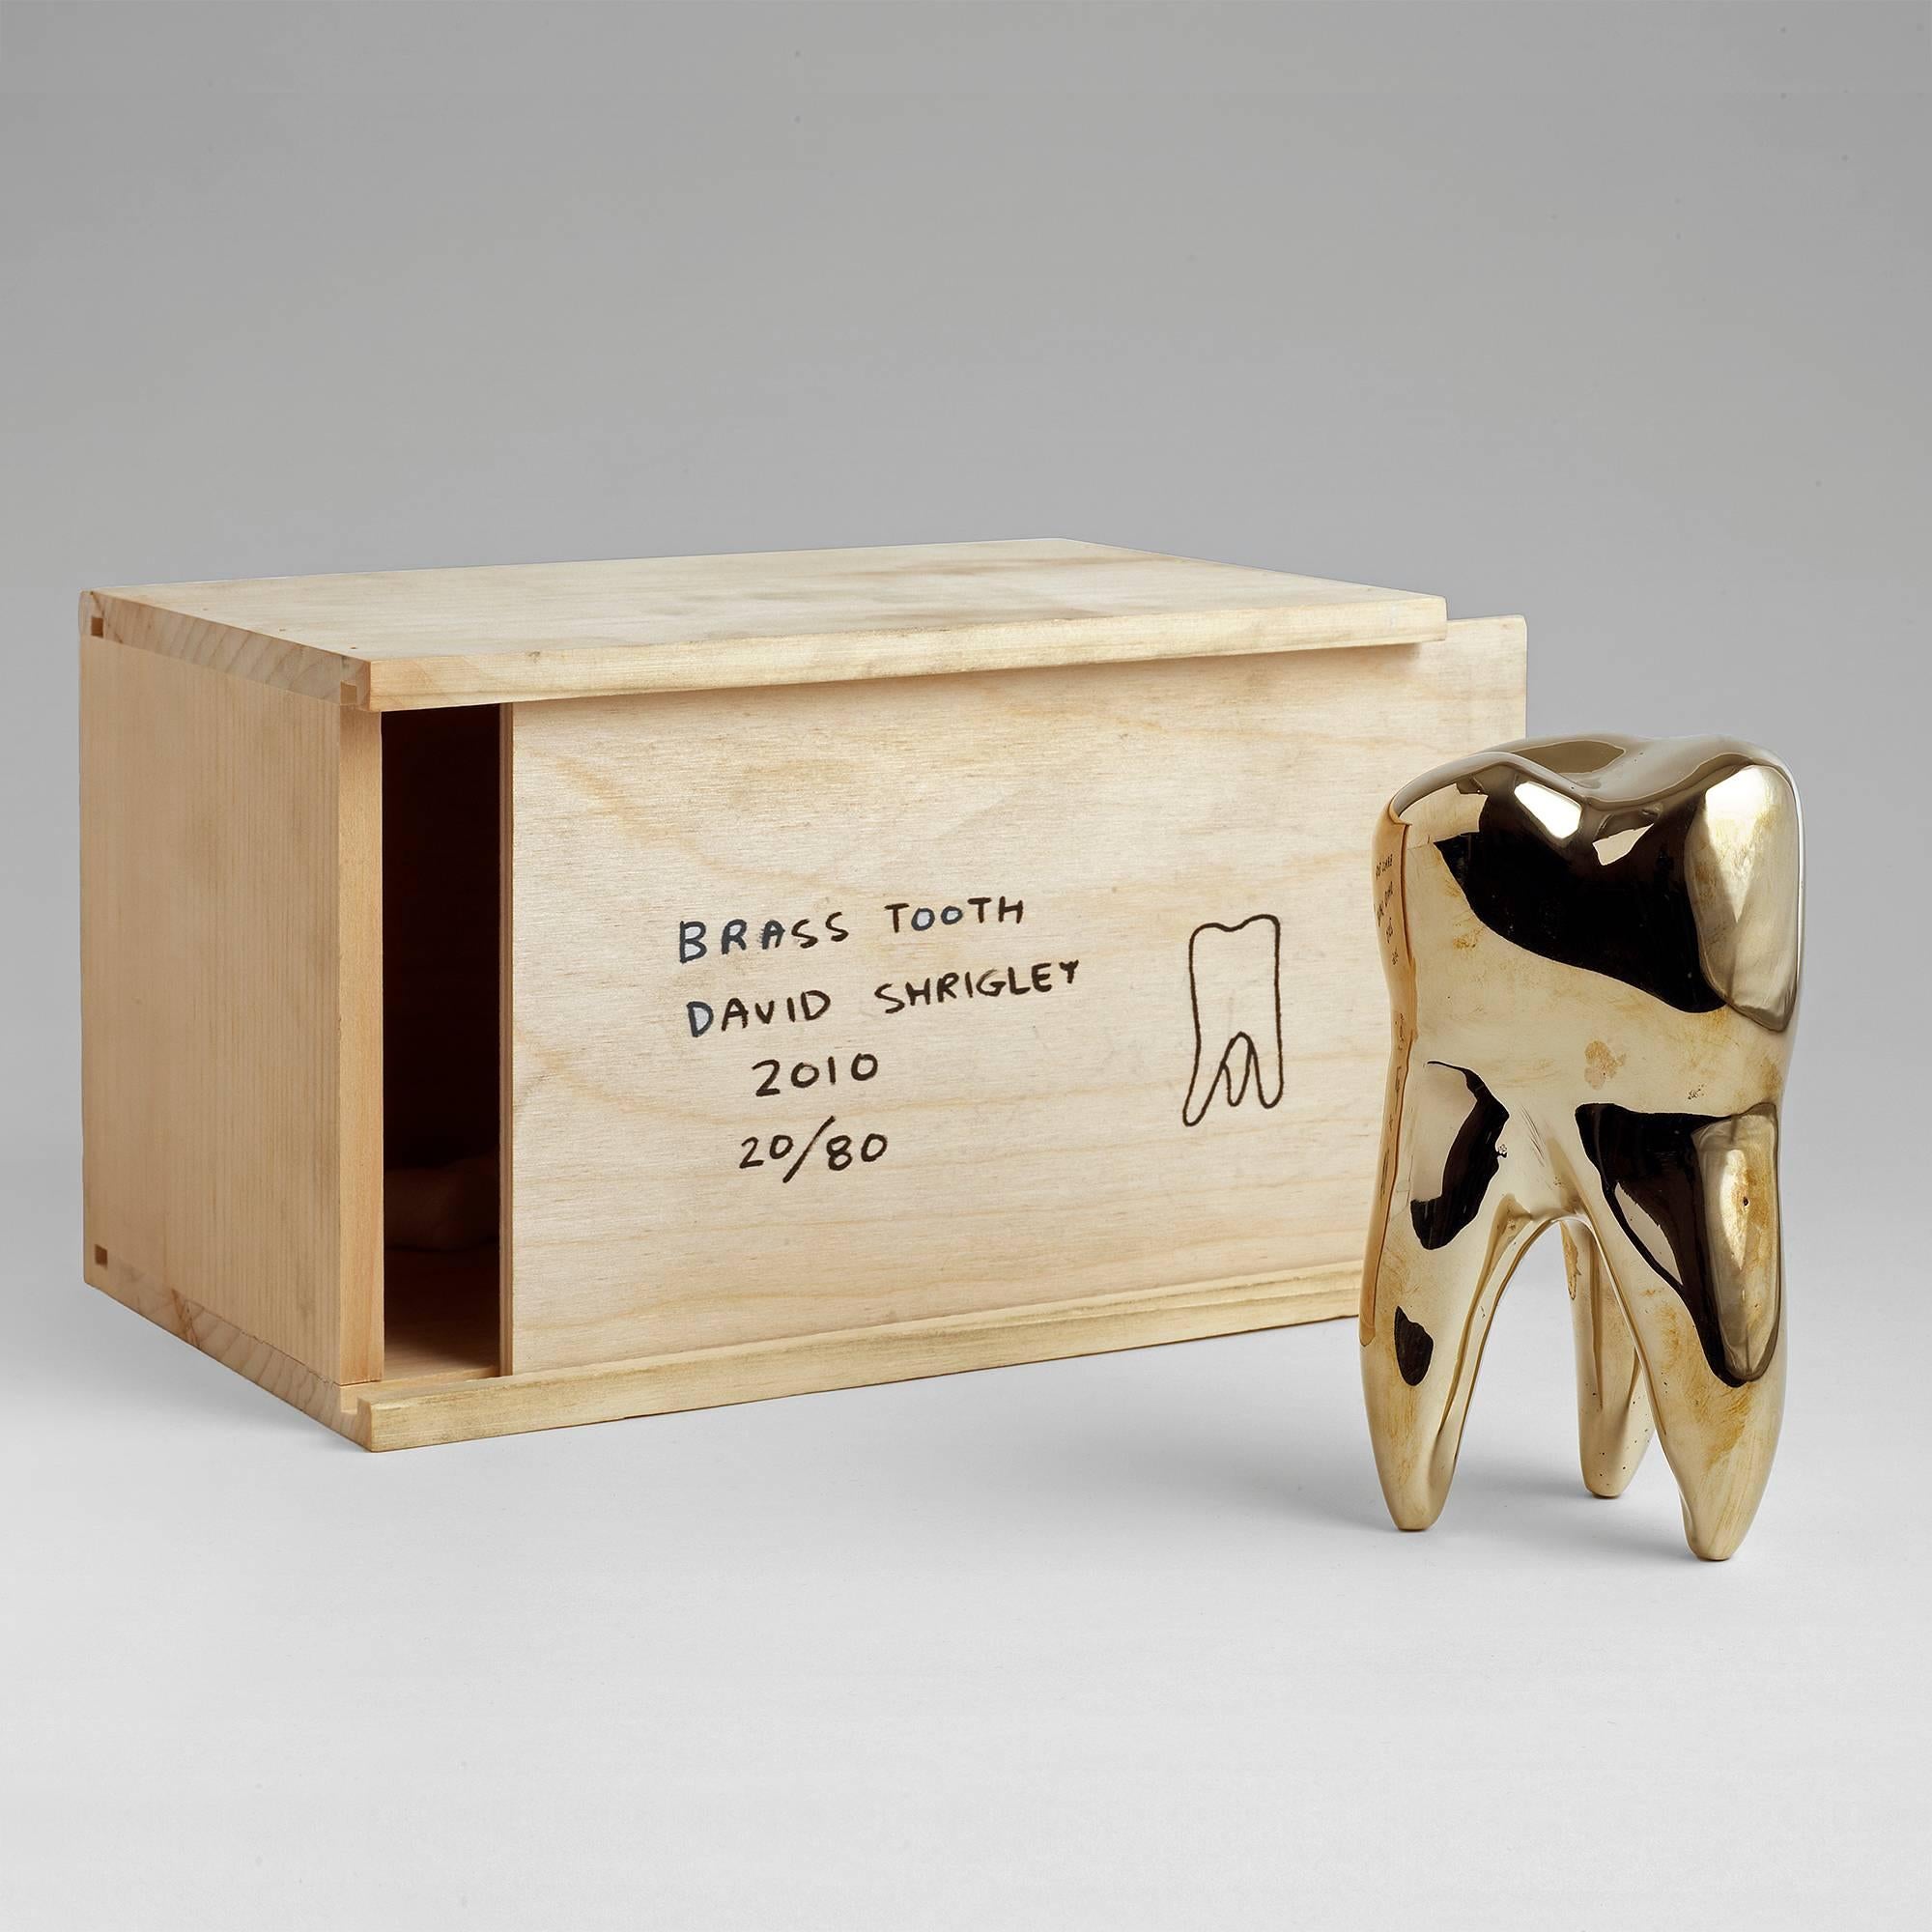 Brass tooth, 2009
solid, polished brass in a wooden box
Measure: 5 1/2 x 3 x 2 1/3